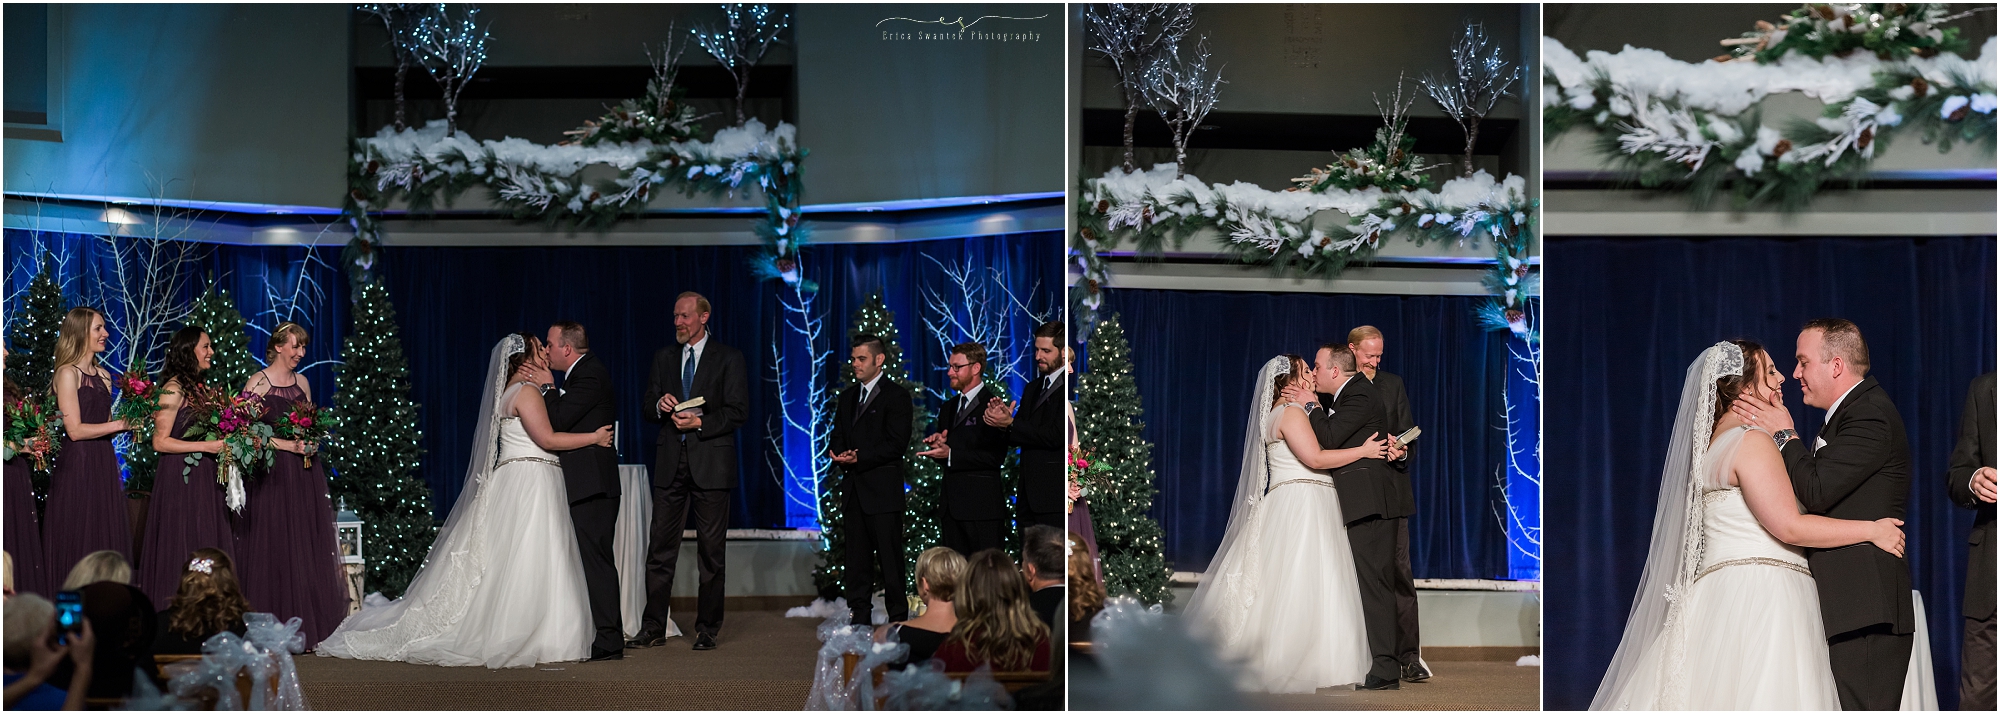 A gorgeous capture of the wedding kiss at this winter woodland wedding in Bend, OR. 